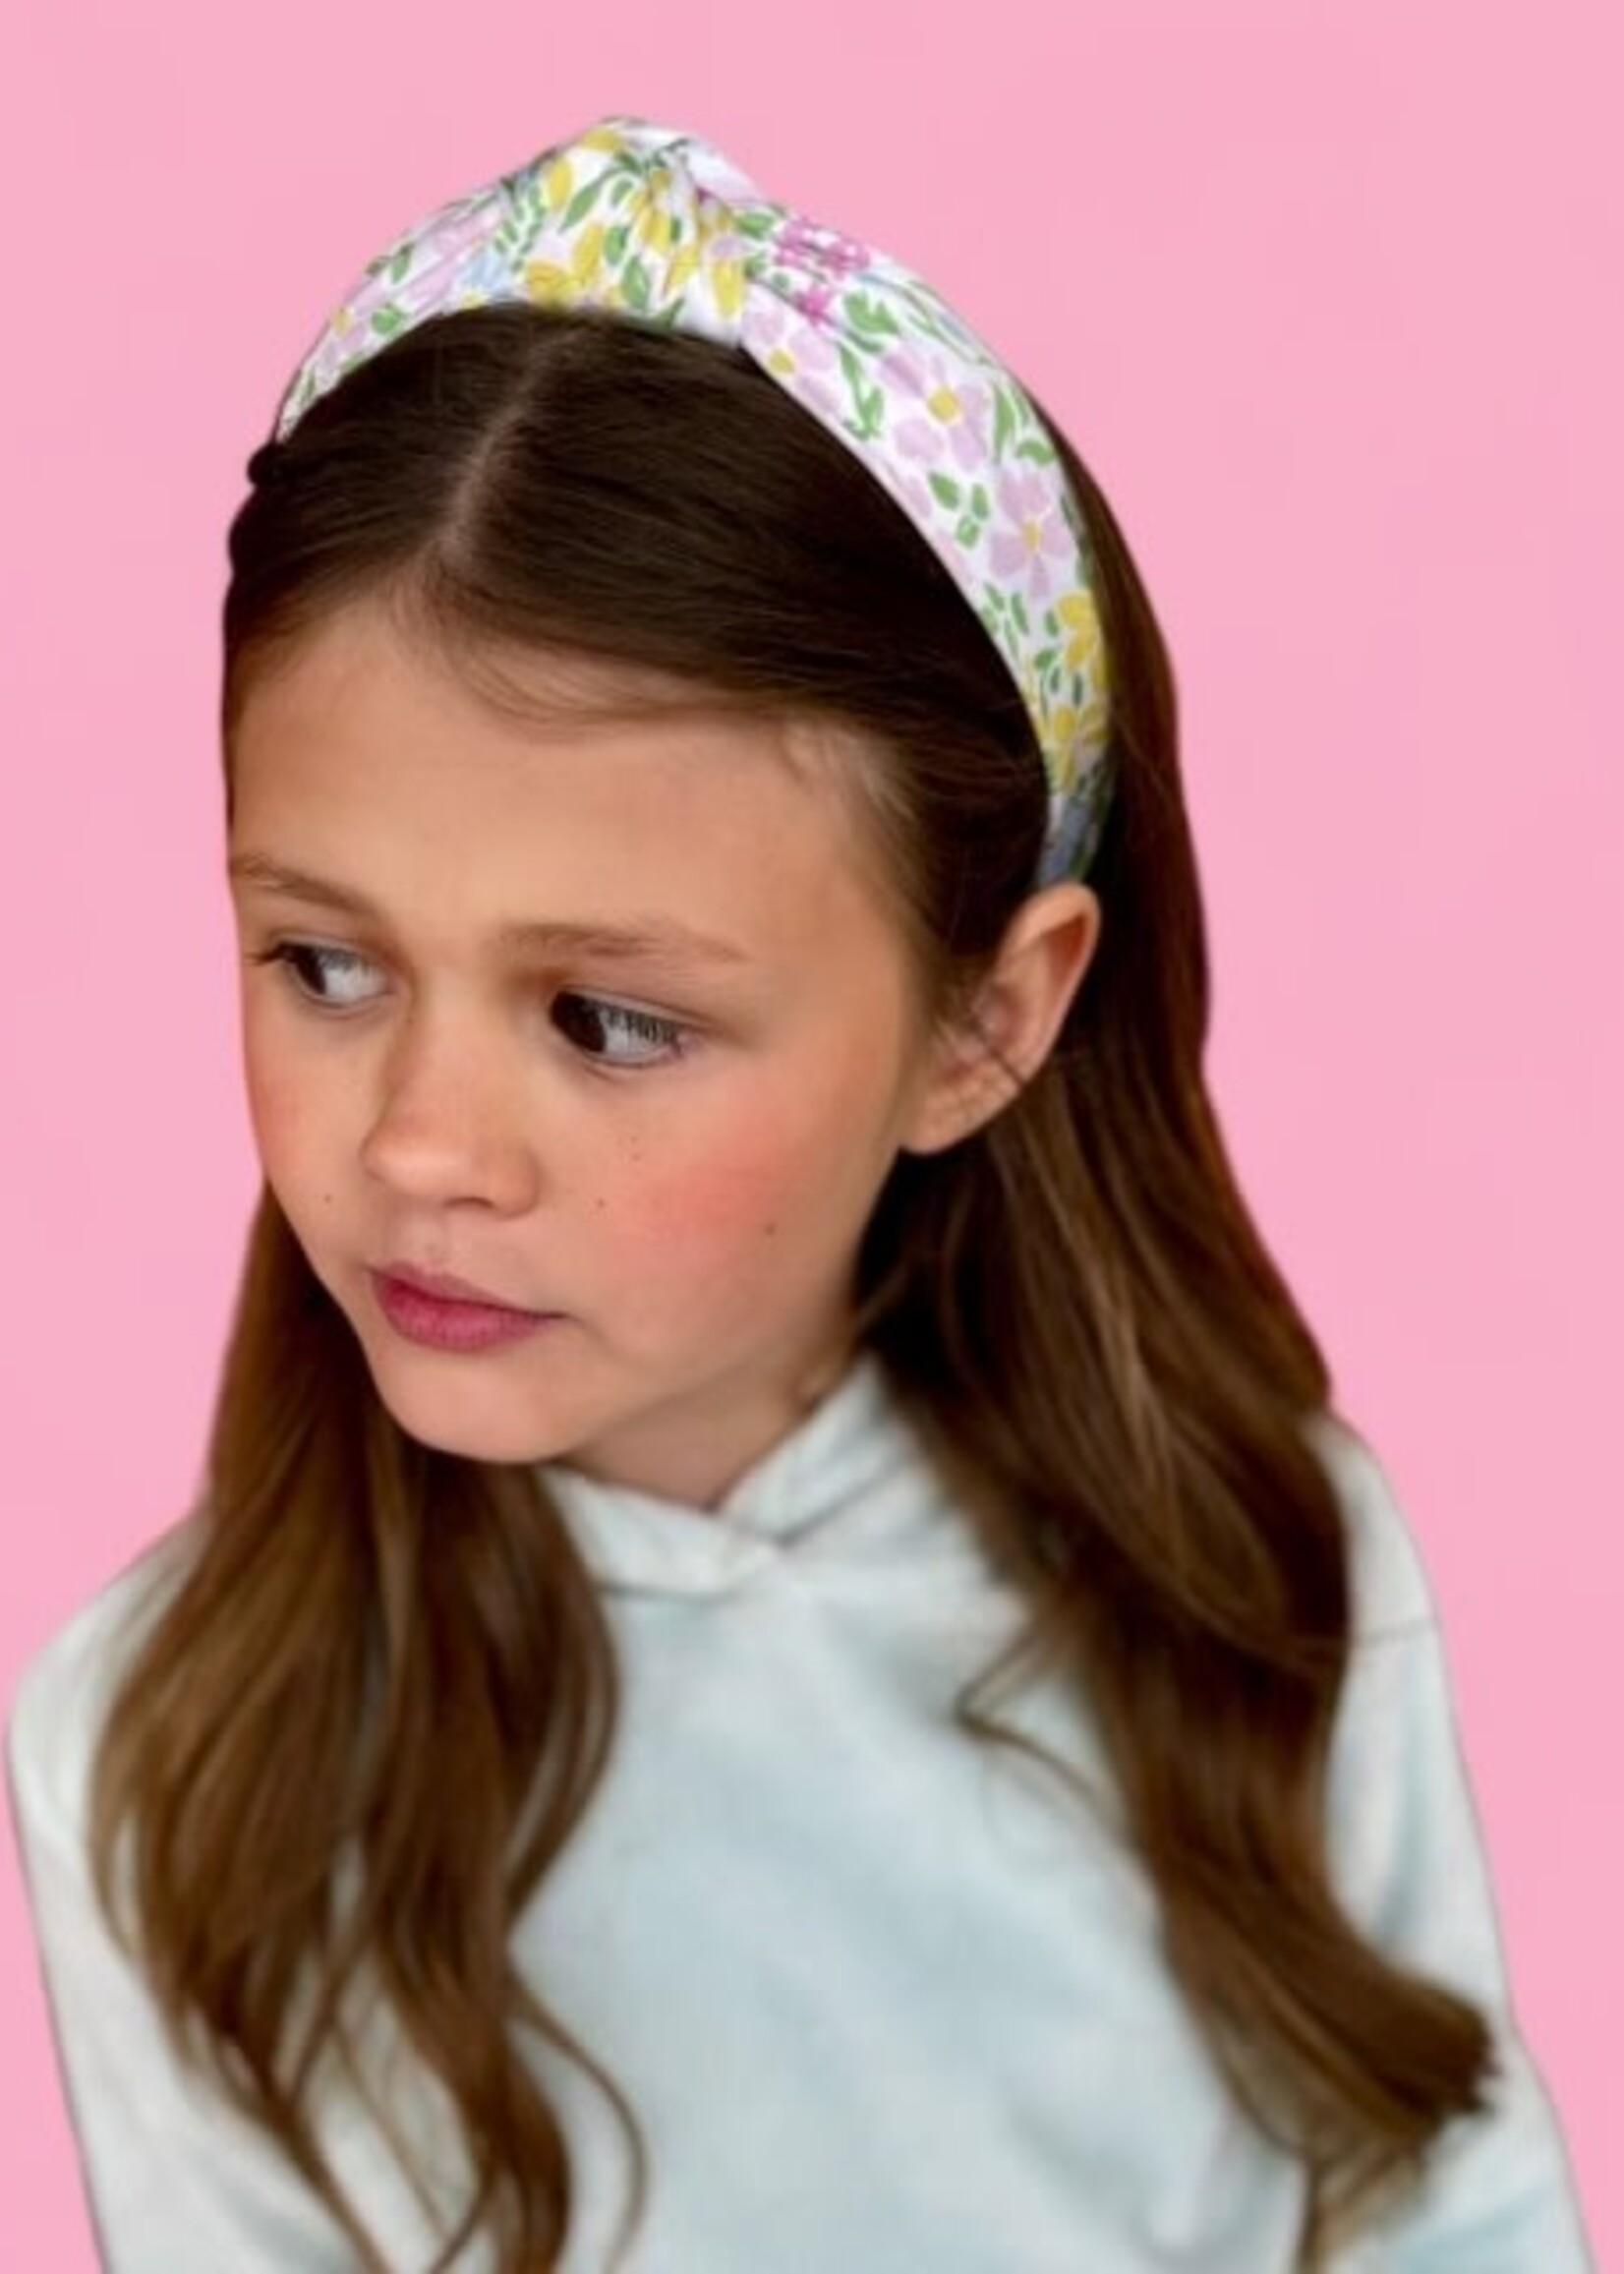 Bloom and Company Girls Pastel Fields Top Knot Headband